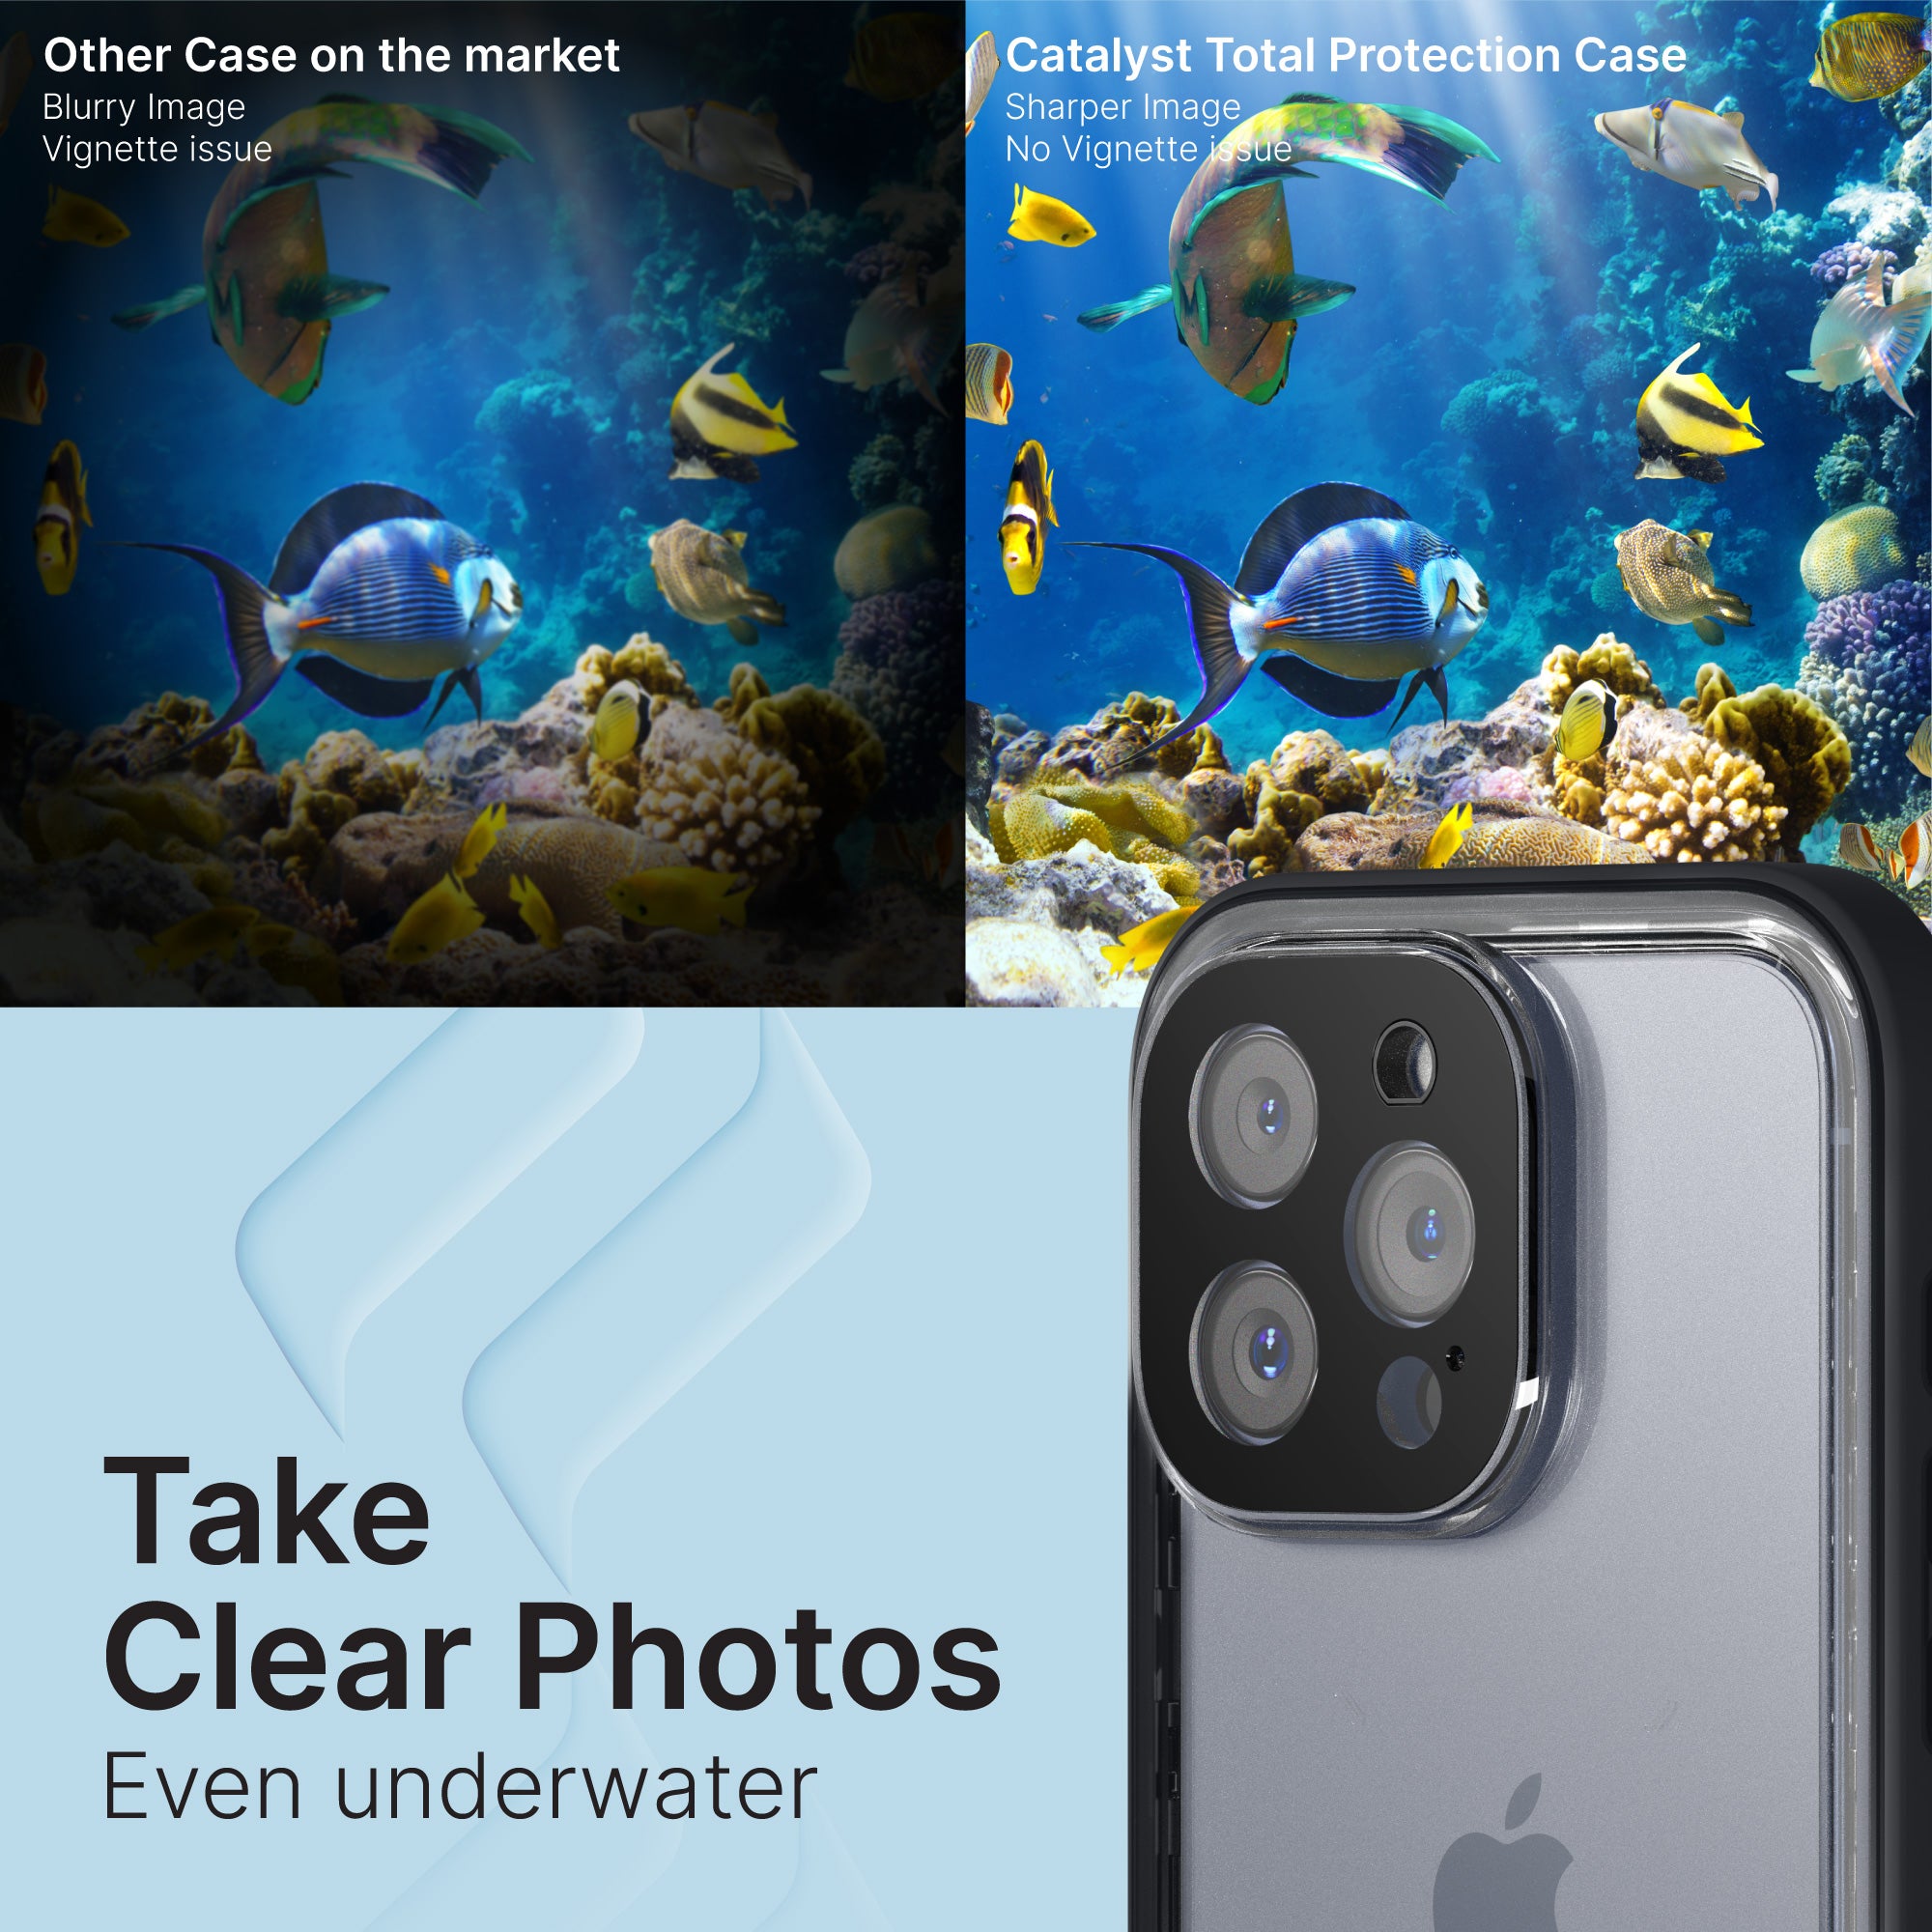 Catalyst Waterproof Case Total Protection for iPhone 14 series take clear photos underwater text reads other case on the market blurry image vignette issue catalyst total protection case sharper image no vignette issue take clear photos even underwater